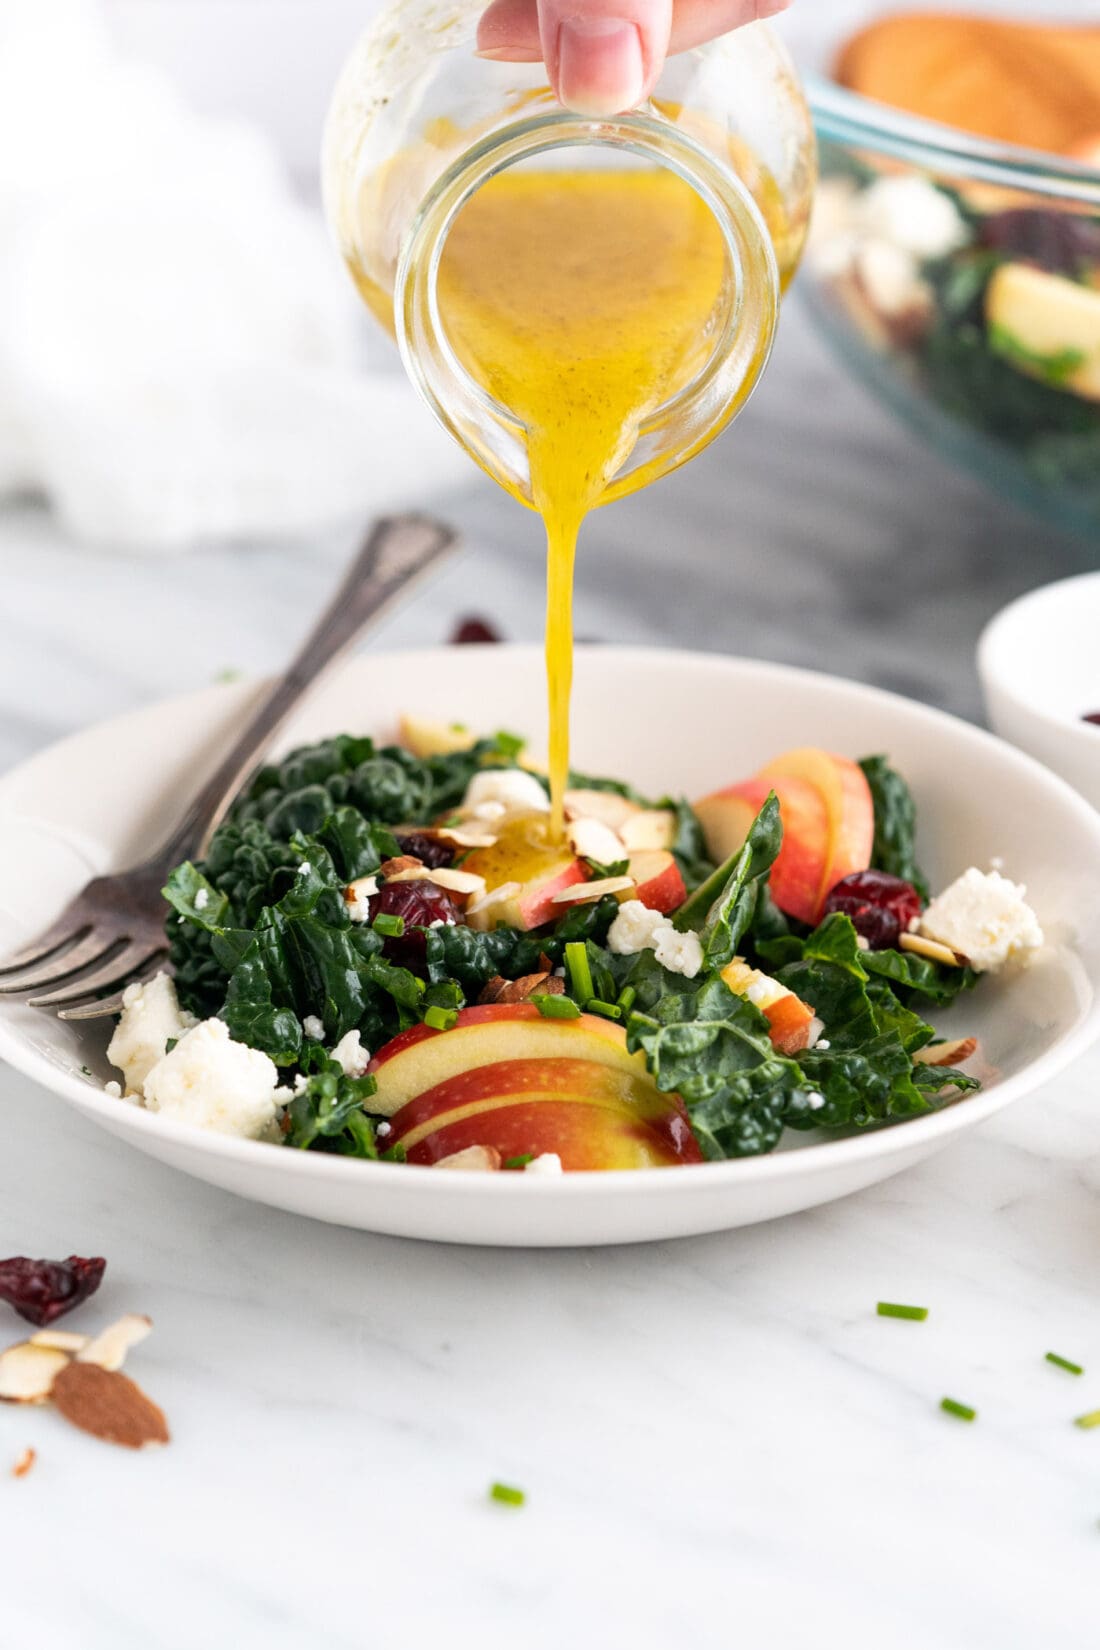 Fresh lemon dressing being drizzled over a bowl of Kale Salad